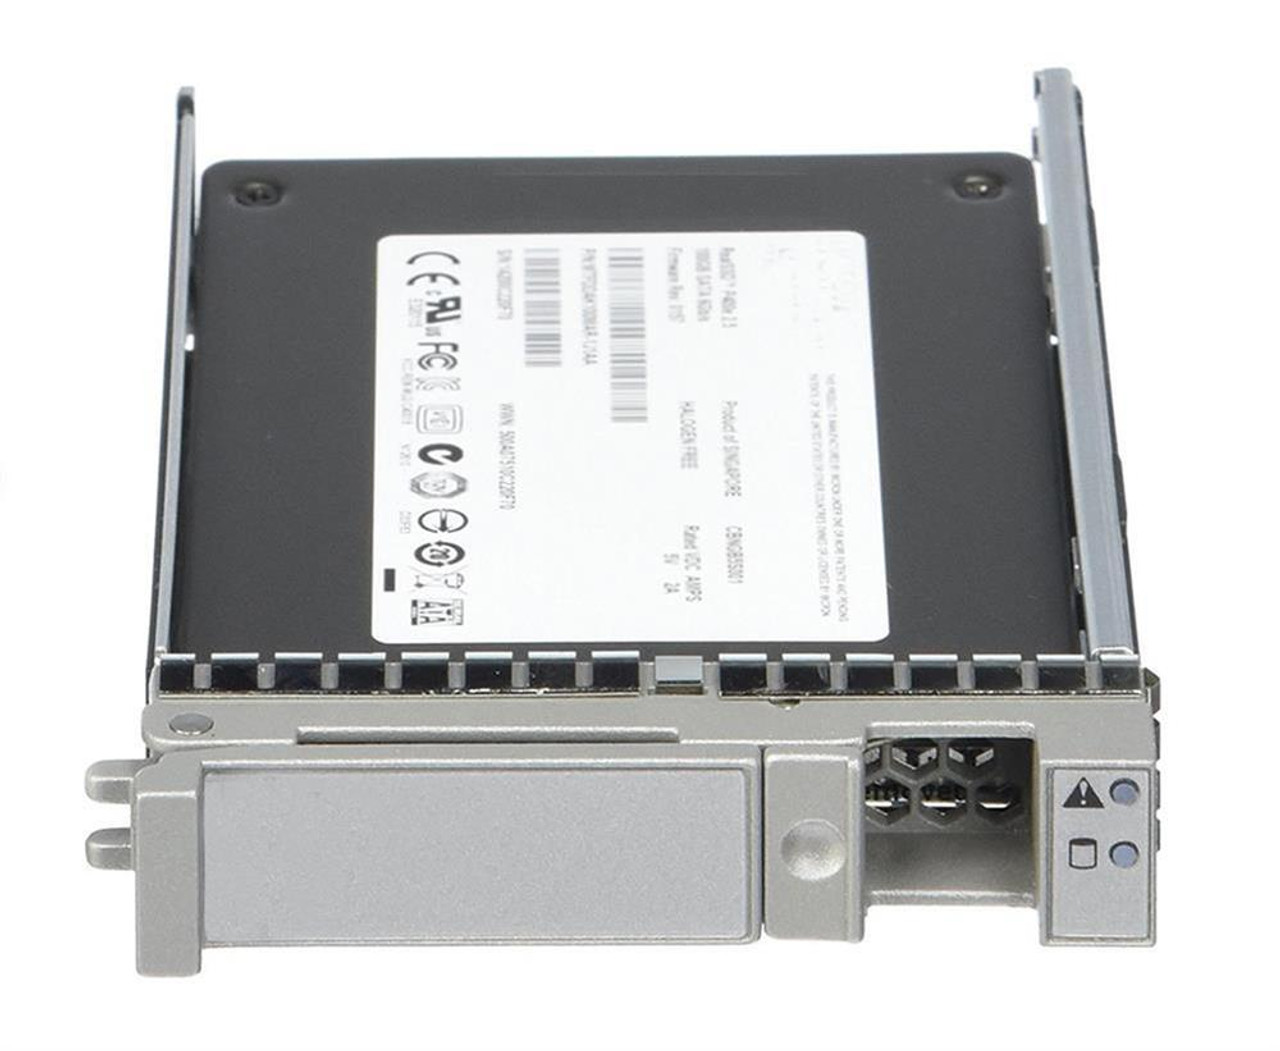 Cisco 960GB SAS 12Gbps Enterprise Value (SED) 2.5-inch Internal Solid State Drive (SSD)